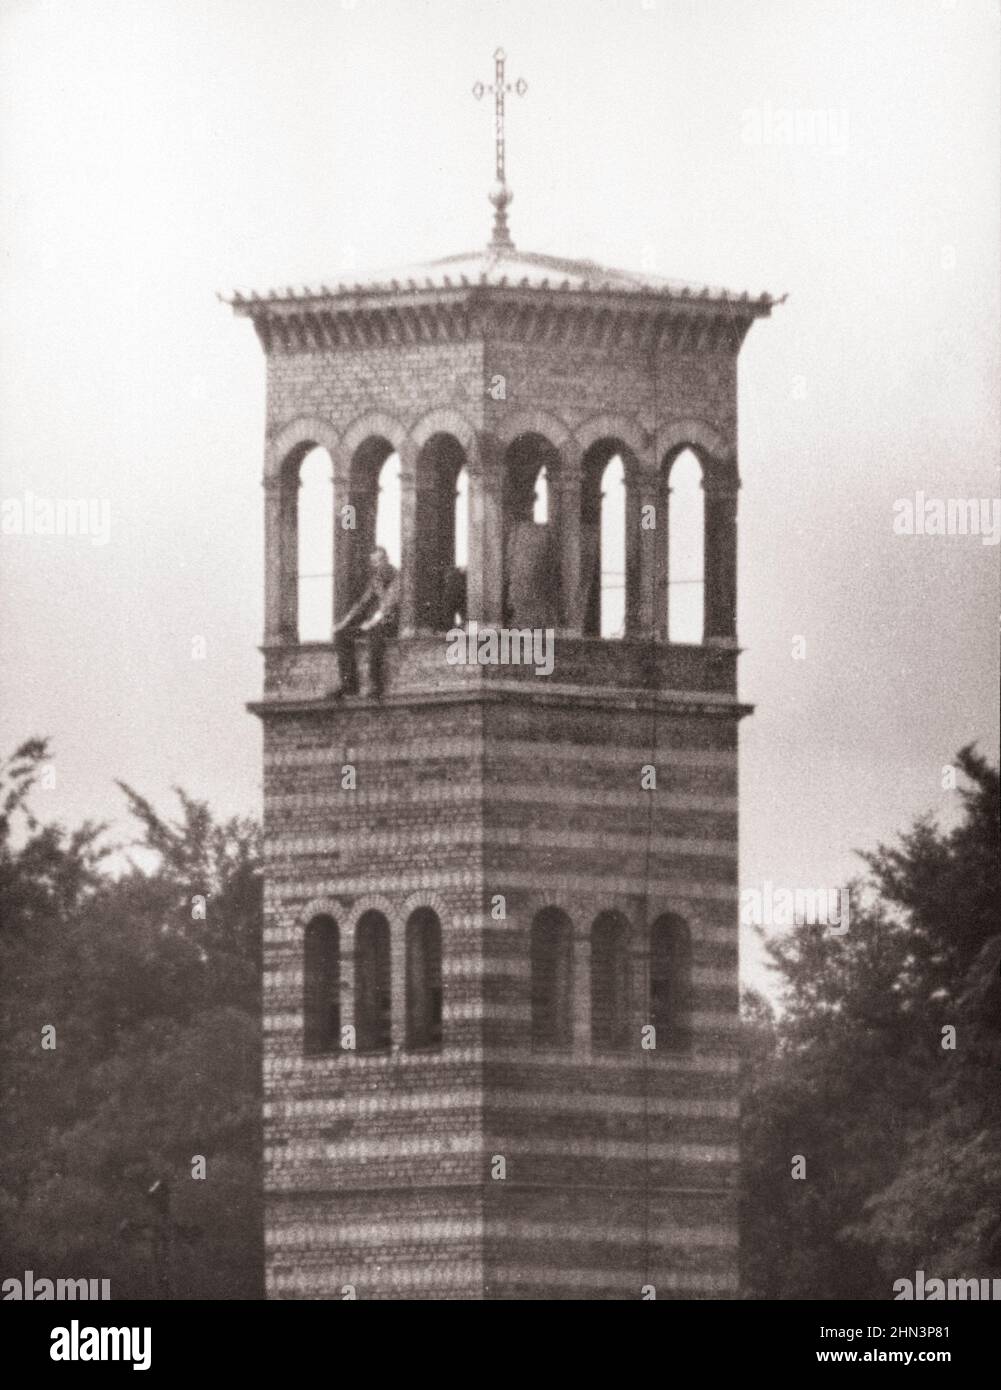 Berlin Crisis of 1961: Building the Wall Observation Tower 'Sakrower Heilandskirche' Church by Eastern Border Patrol. Should A Fugitive Try to Escape, Stock Photo